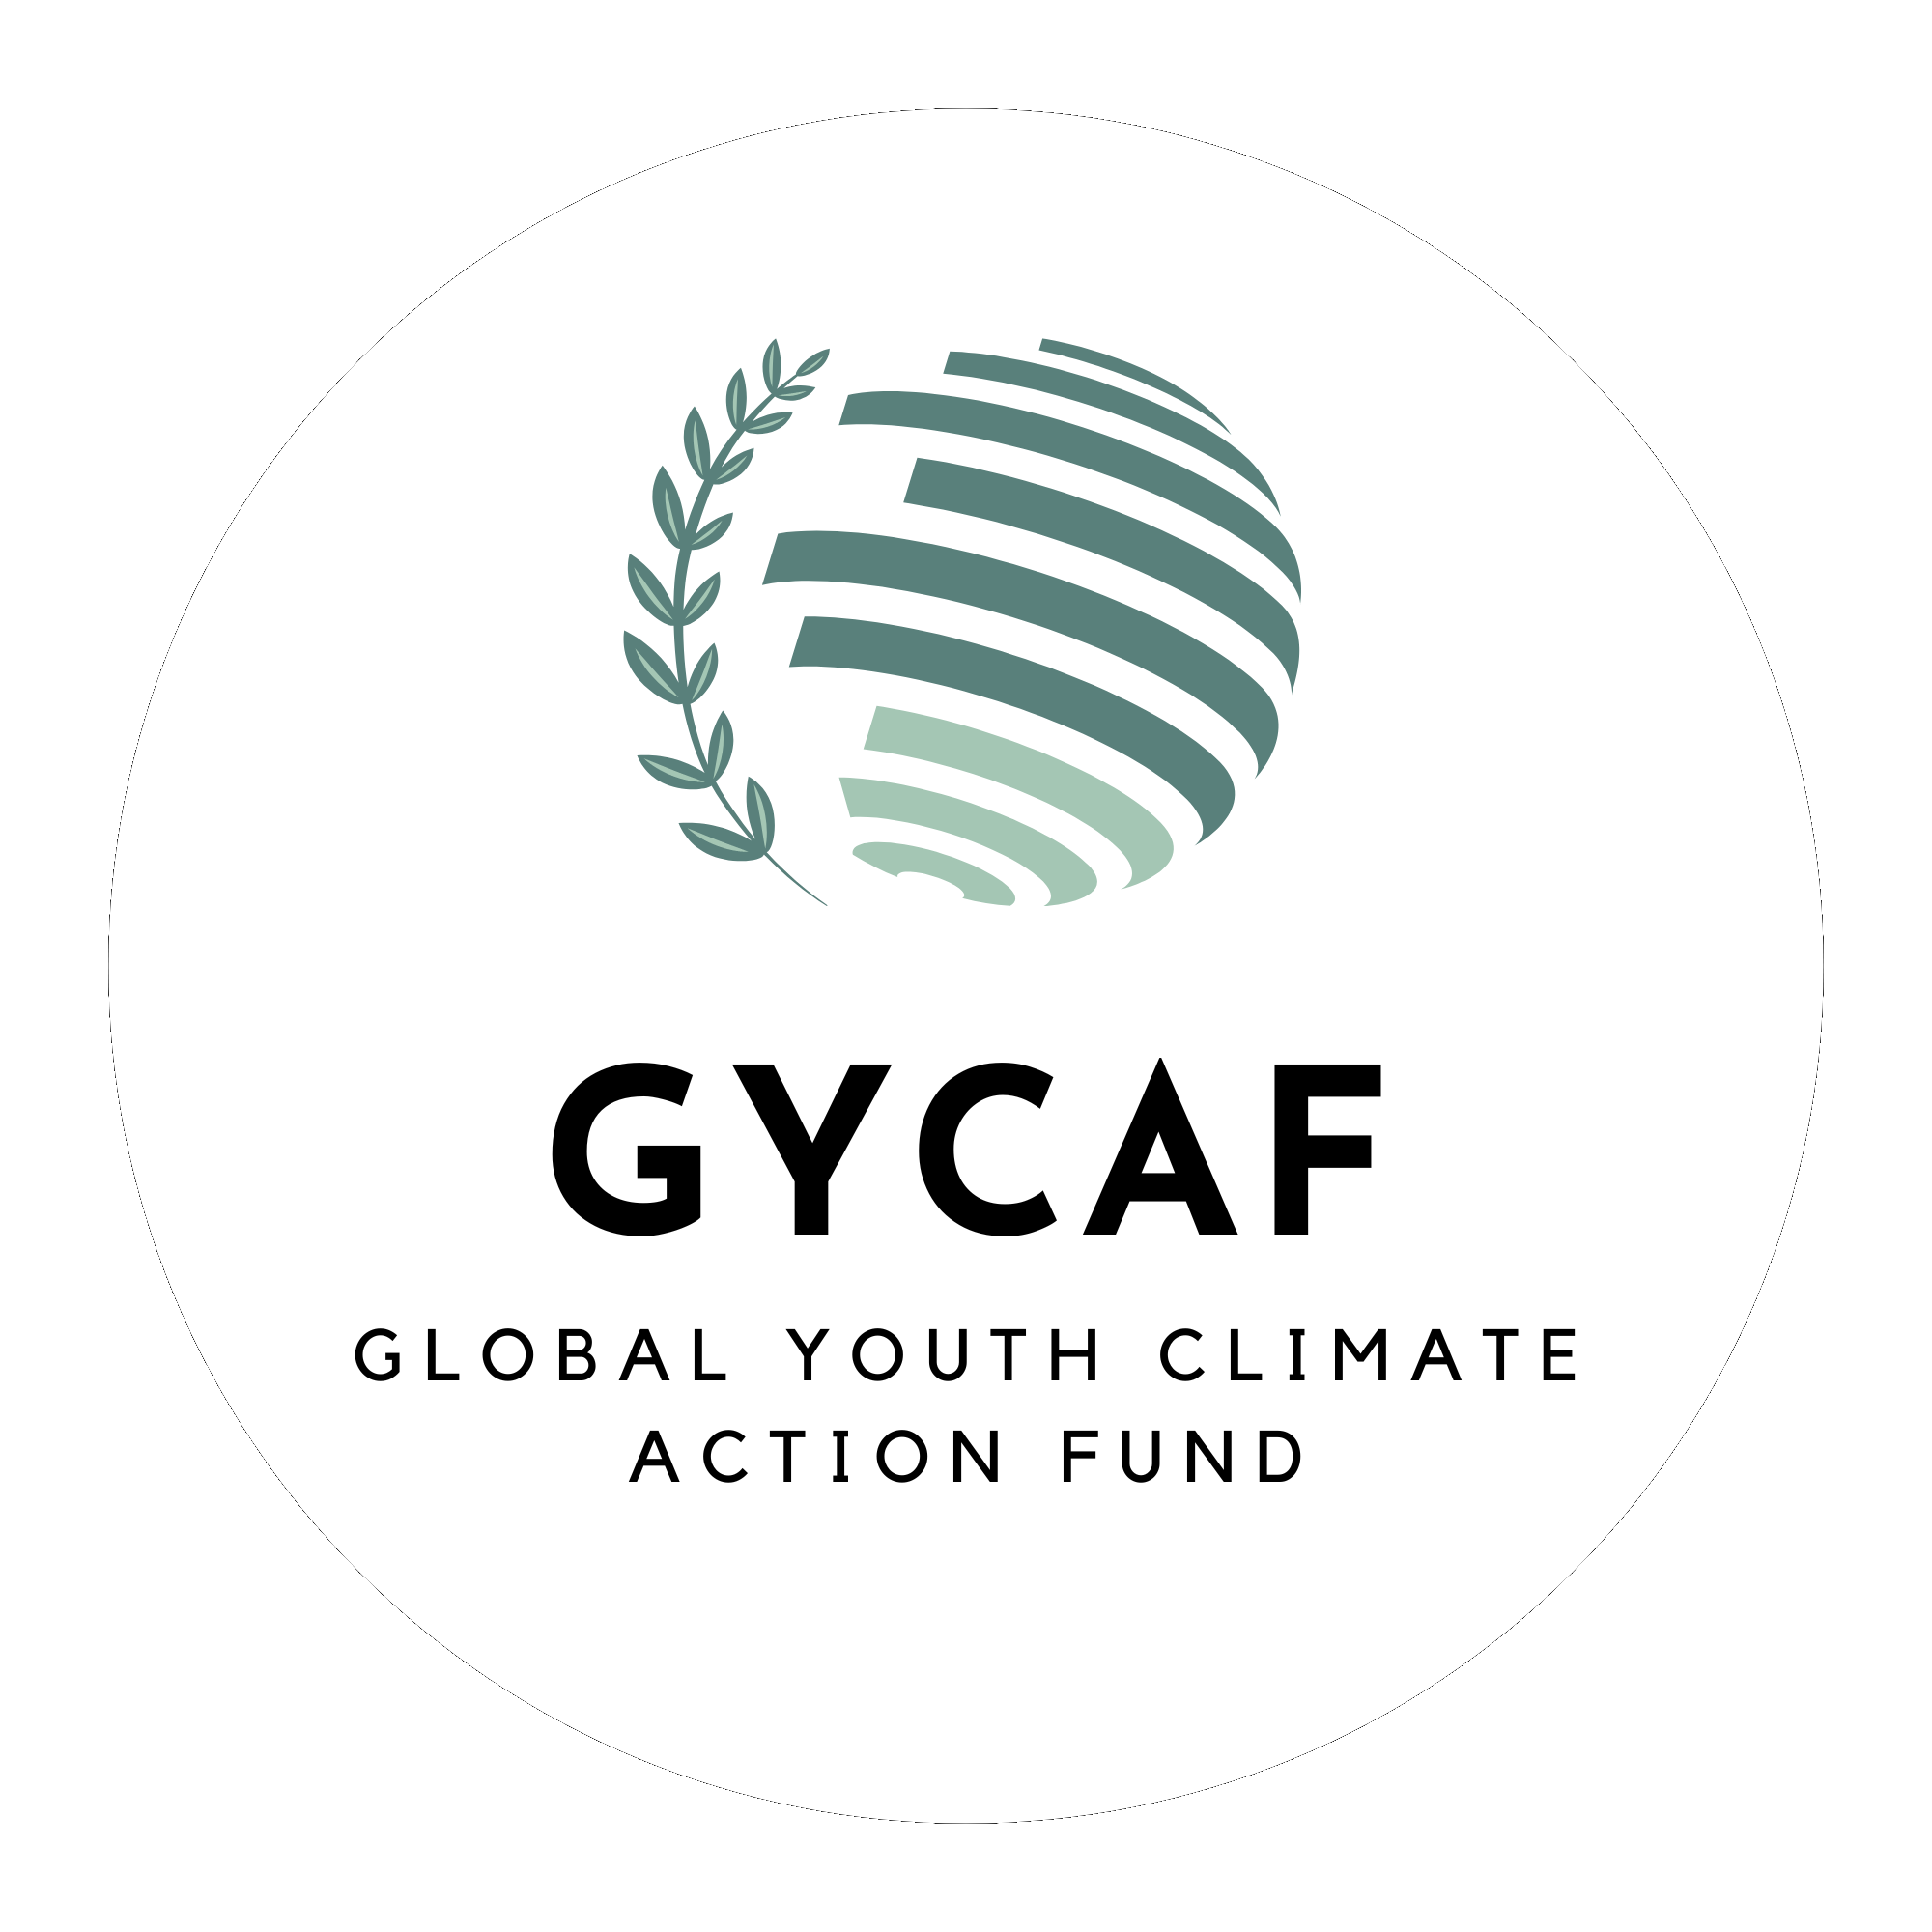 Global Youth Climate Action Fund